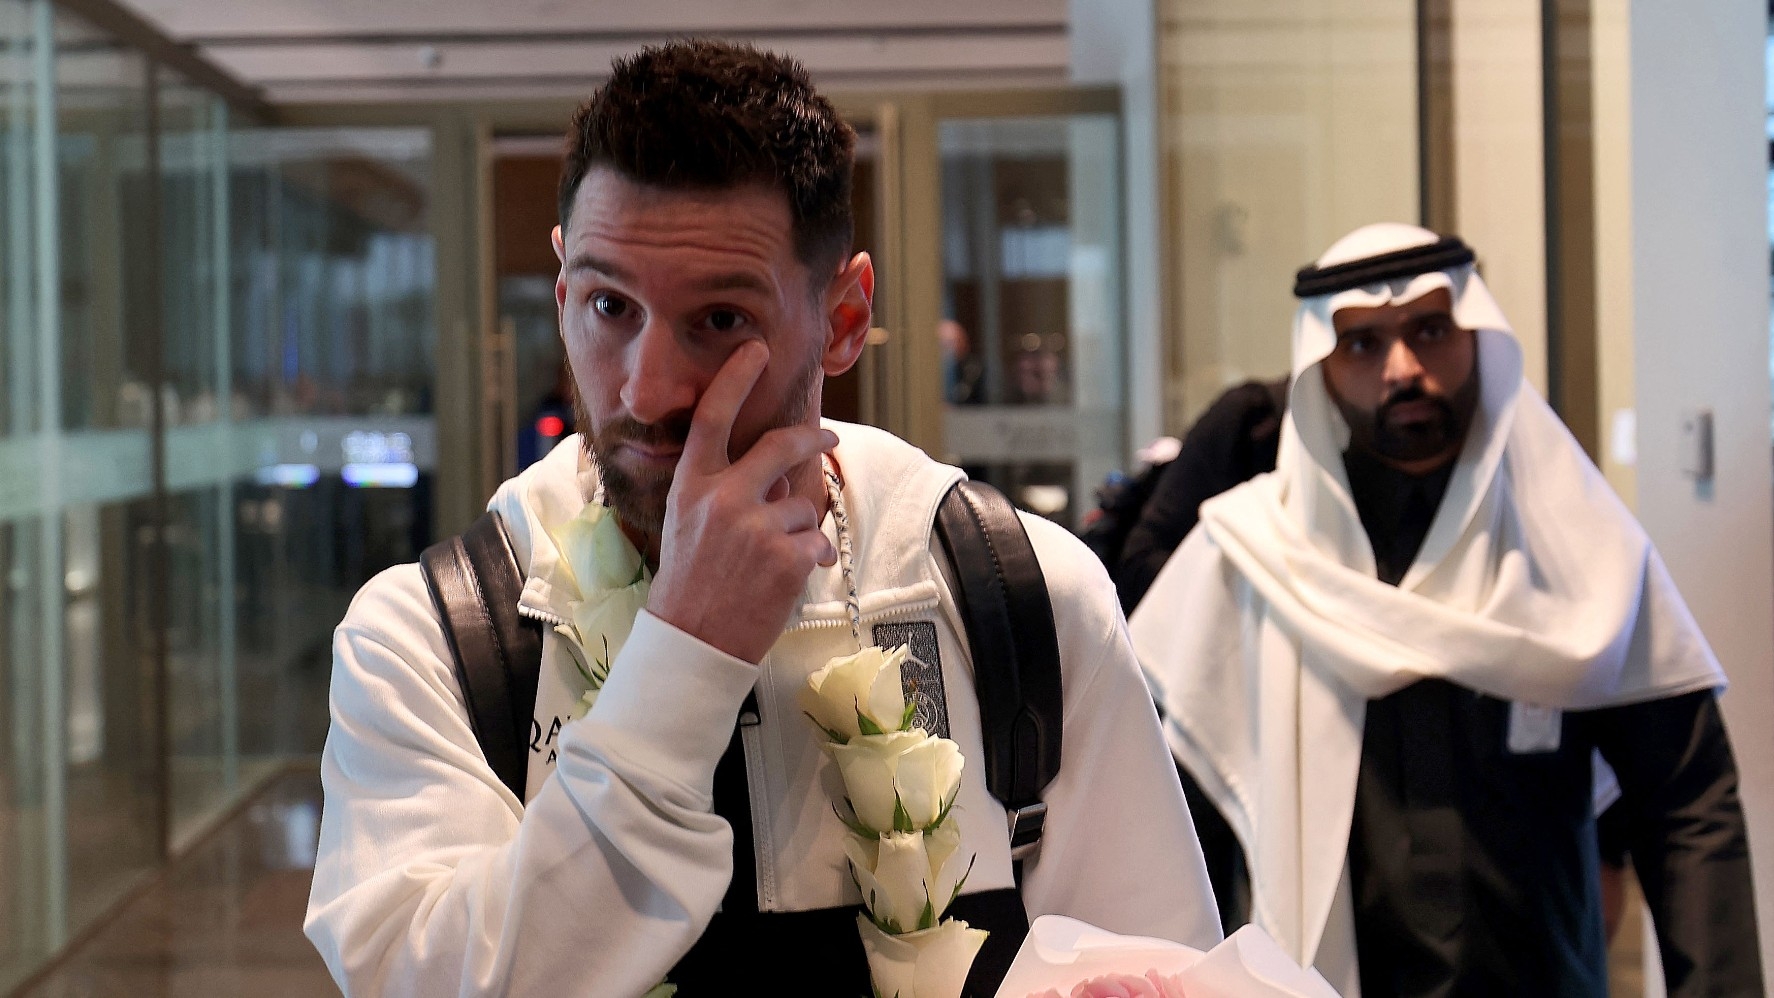 Lionel Messi arrives at an airport in Riyadh during a visit to Saudi Arabia on 19 January, 2023 (AFP)